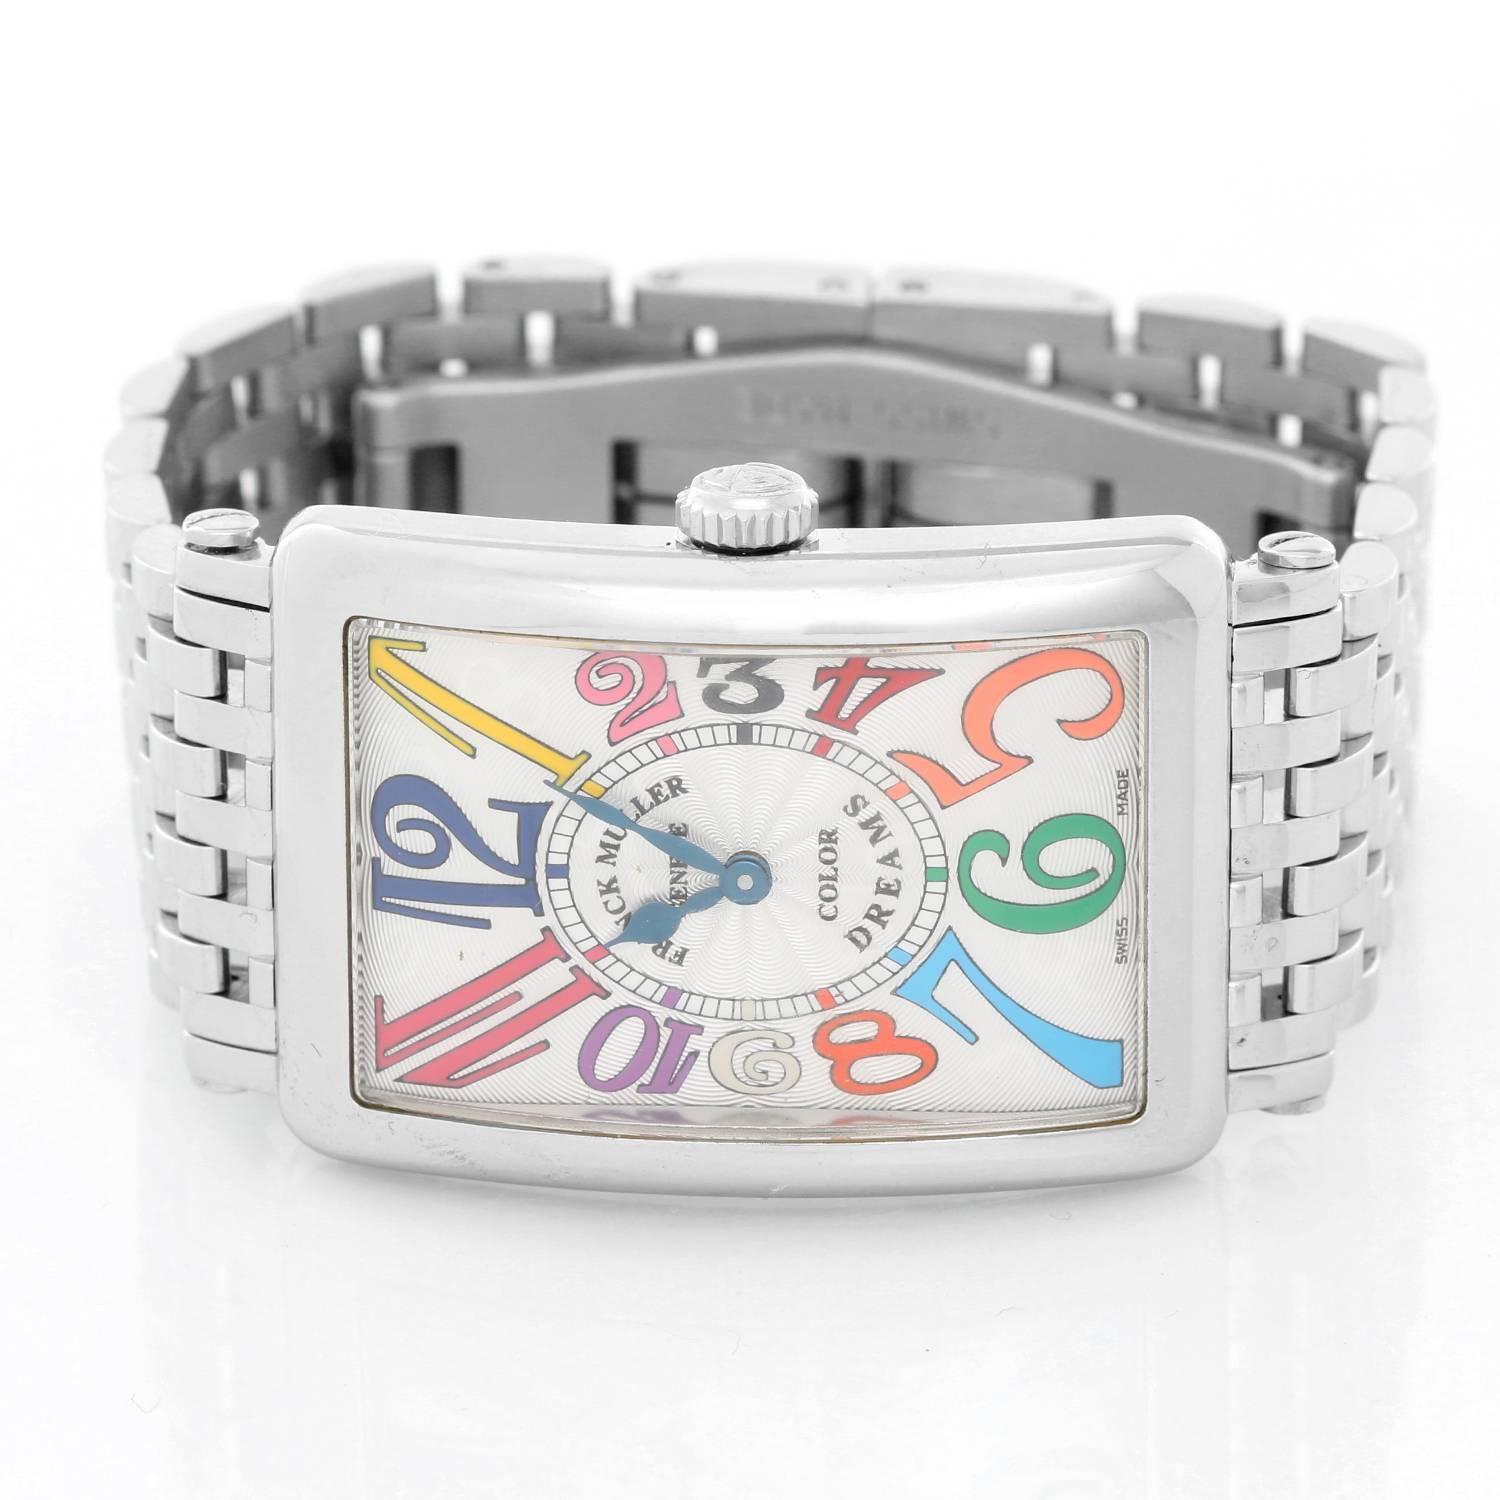 Automatic winding. Stainless steel case (26mm X 36mm). Silvered guilloche dial with multi color Arabic numerals. Stainless steel Franck Muller bracelet. Pre-owned with custom box.